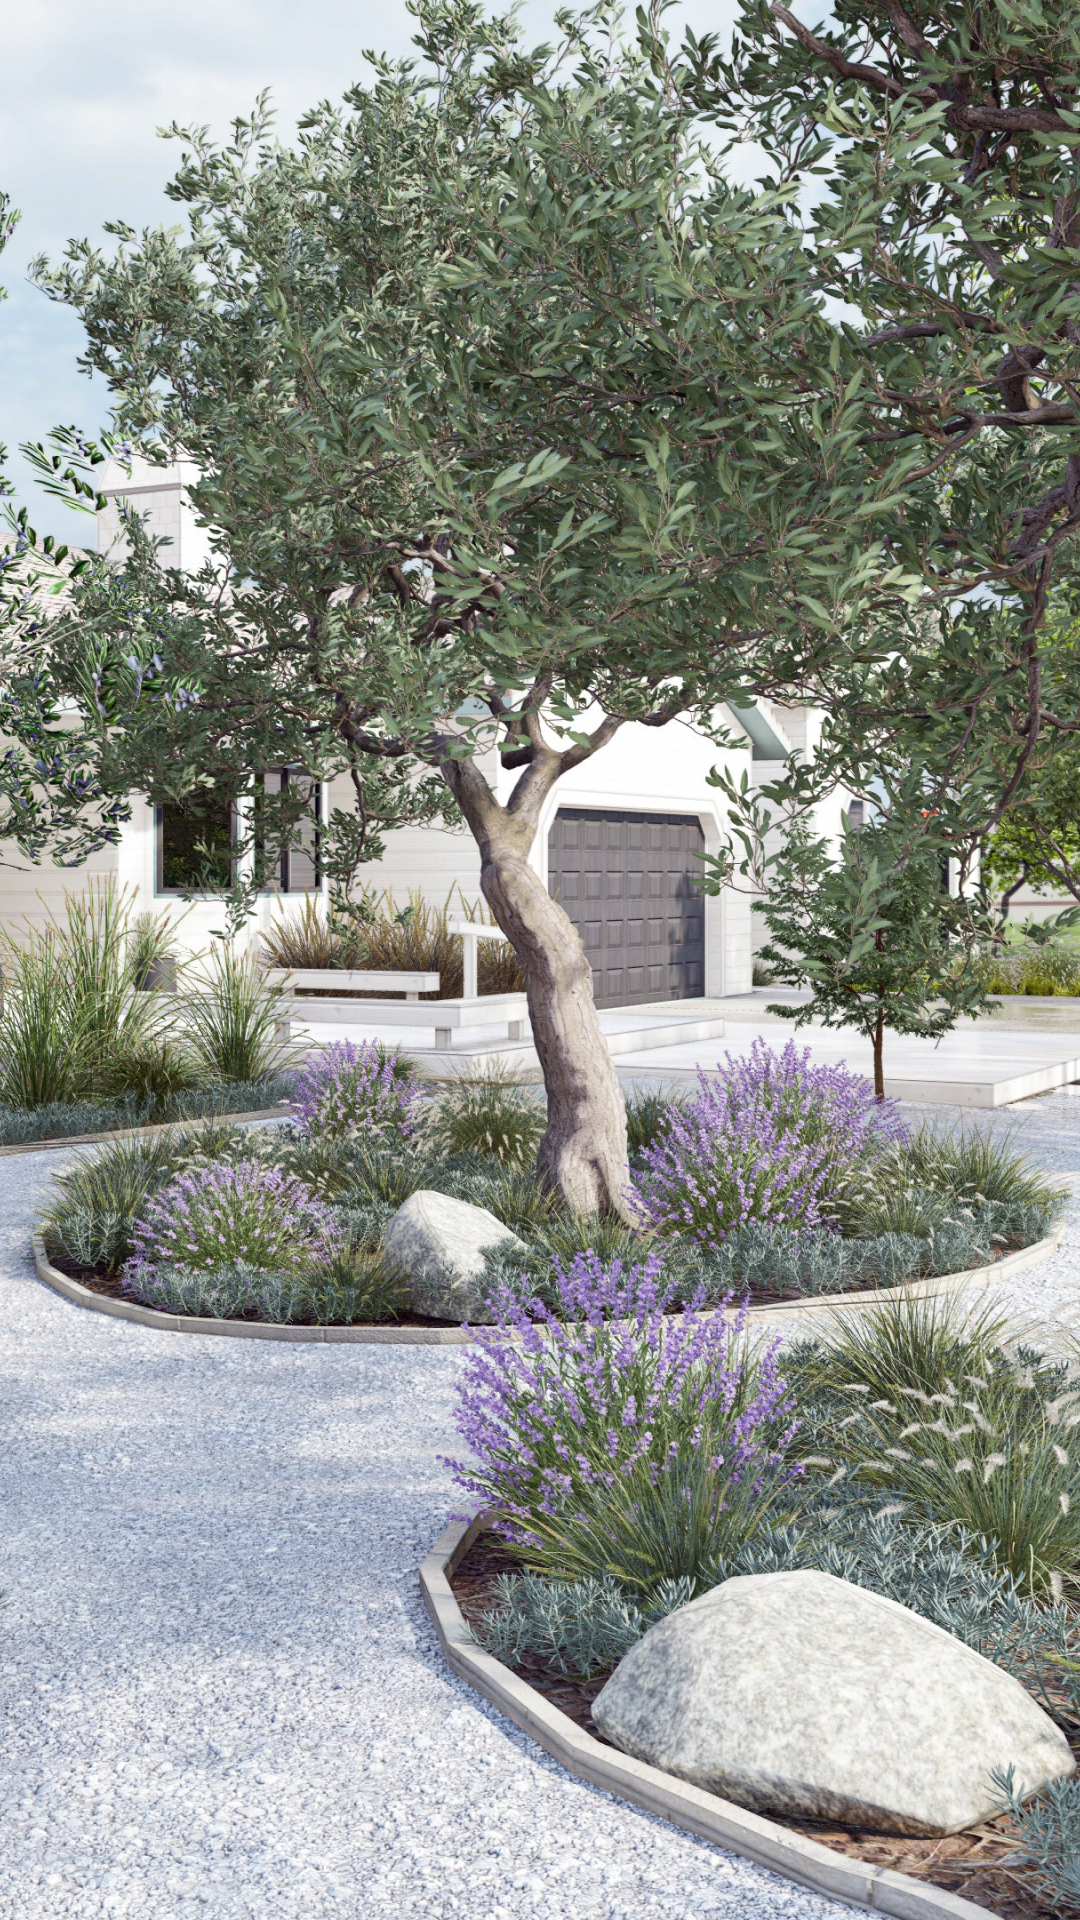 Transform Your Outdoor Space with These
Garden Landscaping Tips